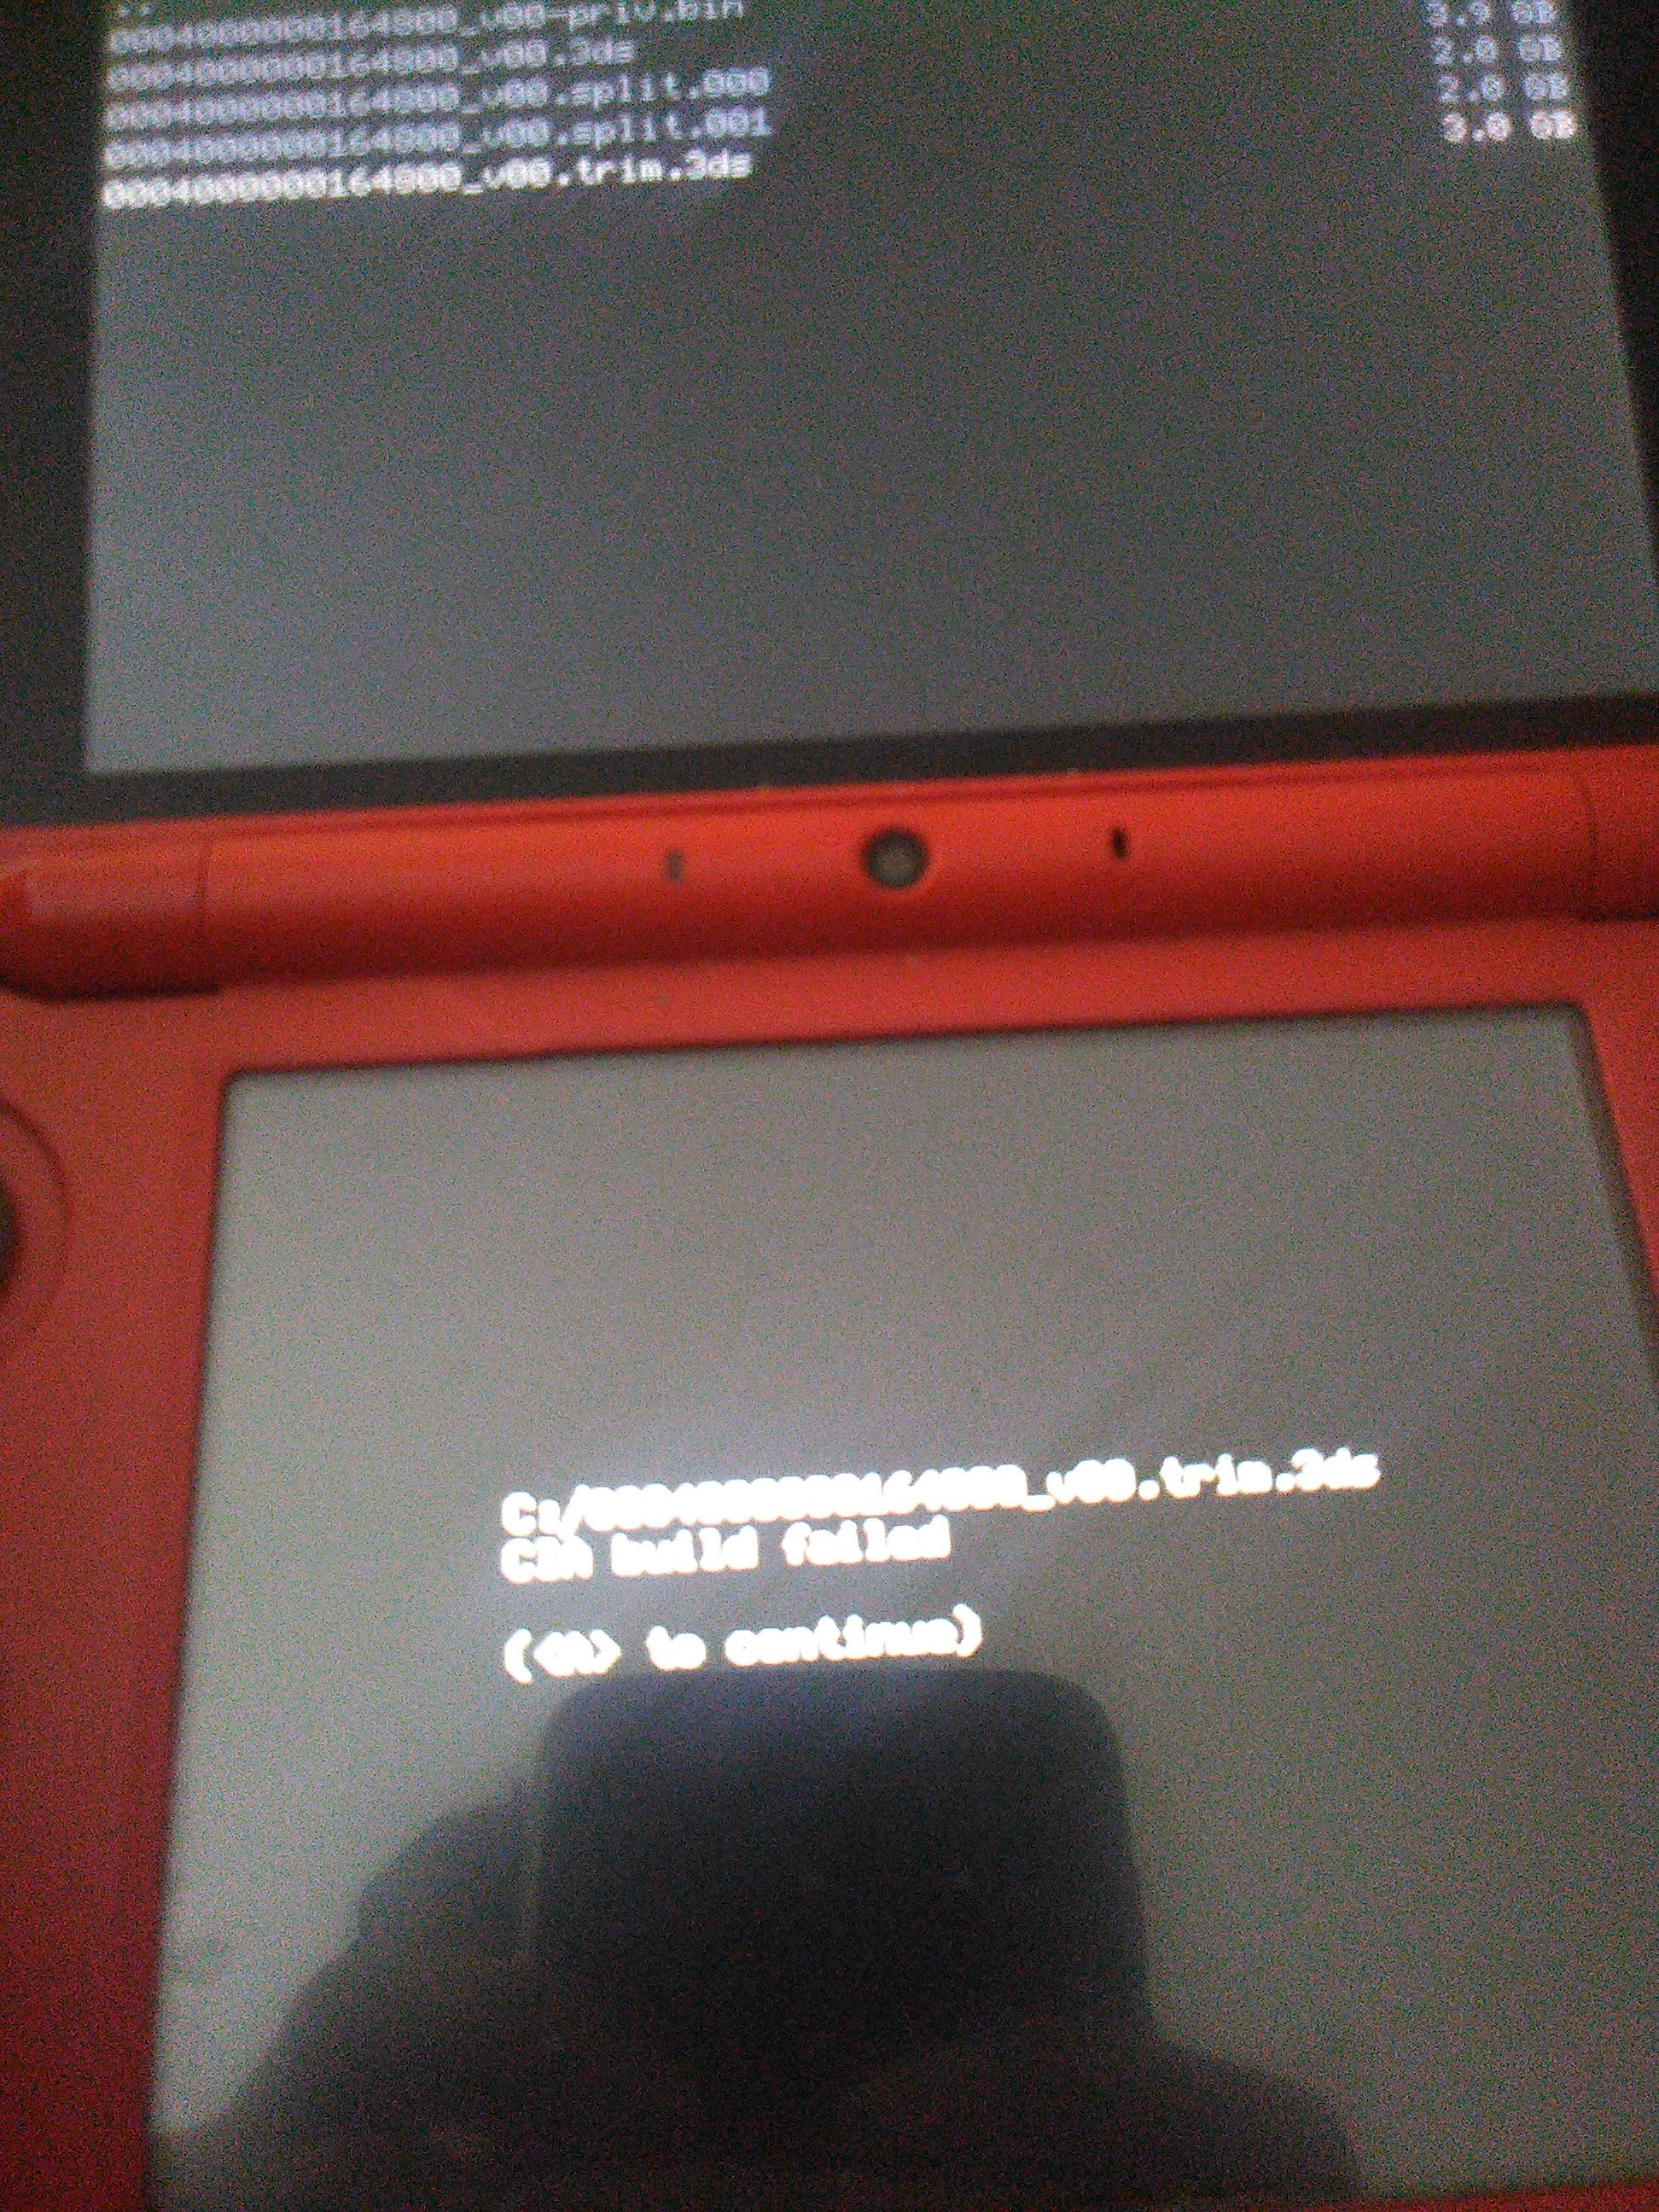 how to convert .3ds to .cia video